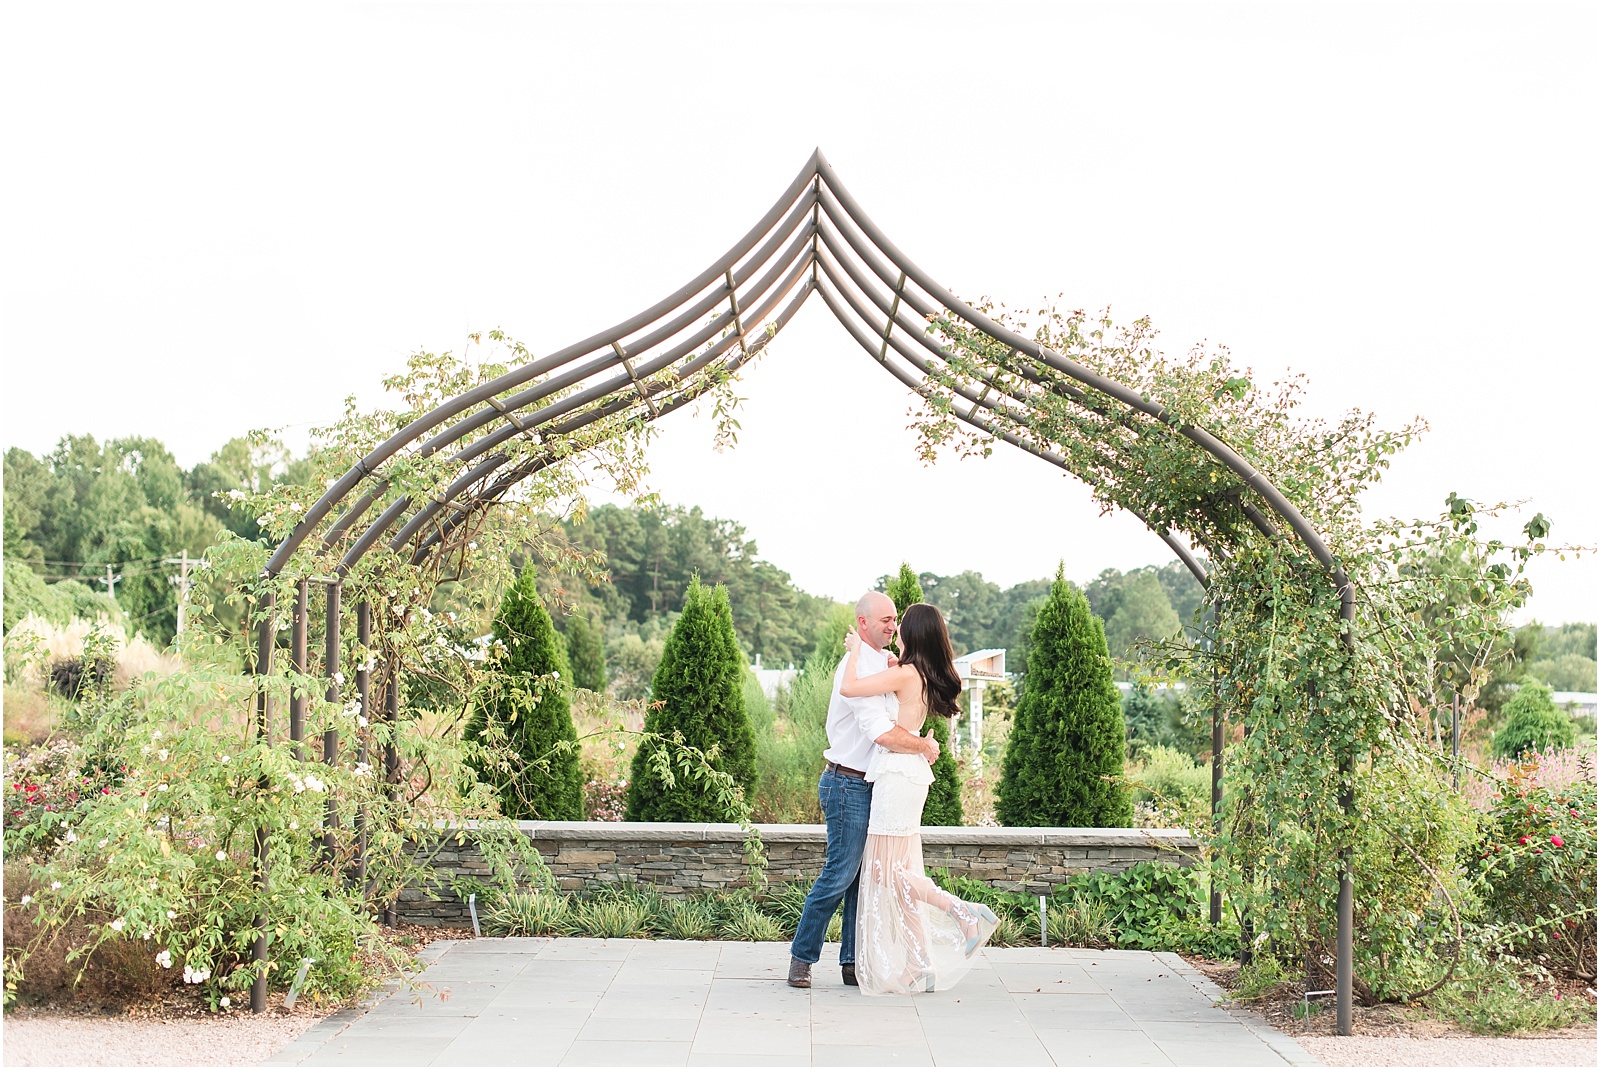 man wearing a white shirt and woman wearing a white dress twirlling underneath a vine arbor at JC Raulston Arboretum